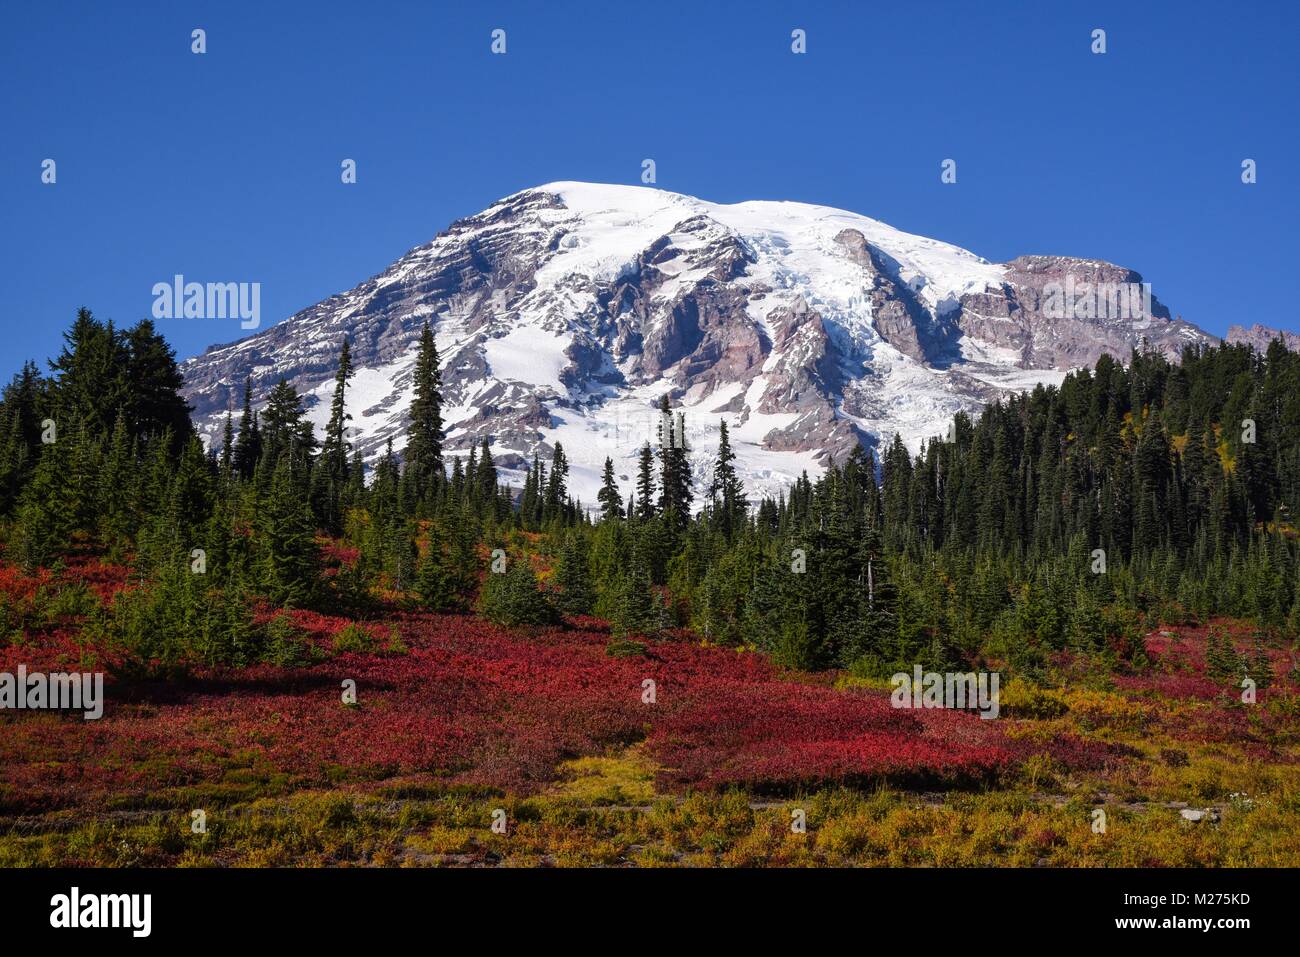 Beautiful Paradise hiking trail area, Washington state, USA in the fall with snow on Mount Rainier on a sunny day with blue sky Stock Photo